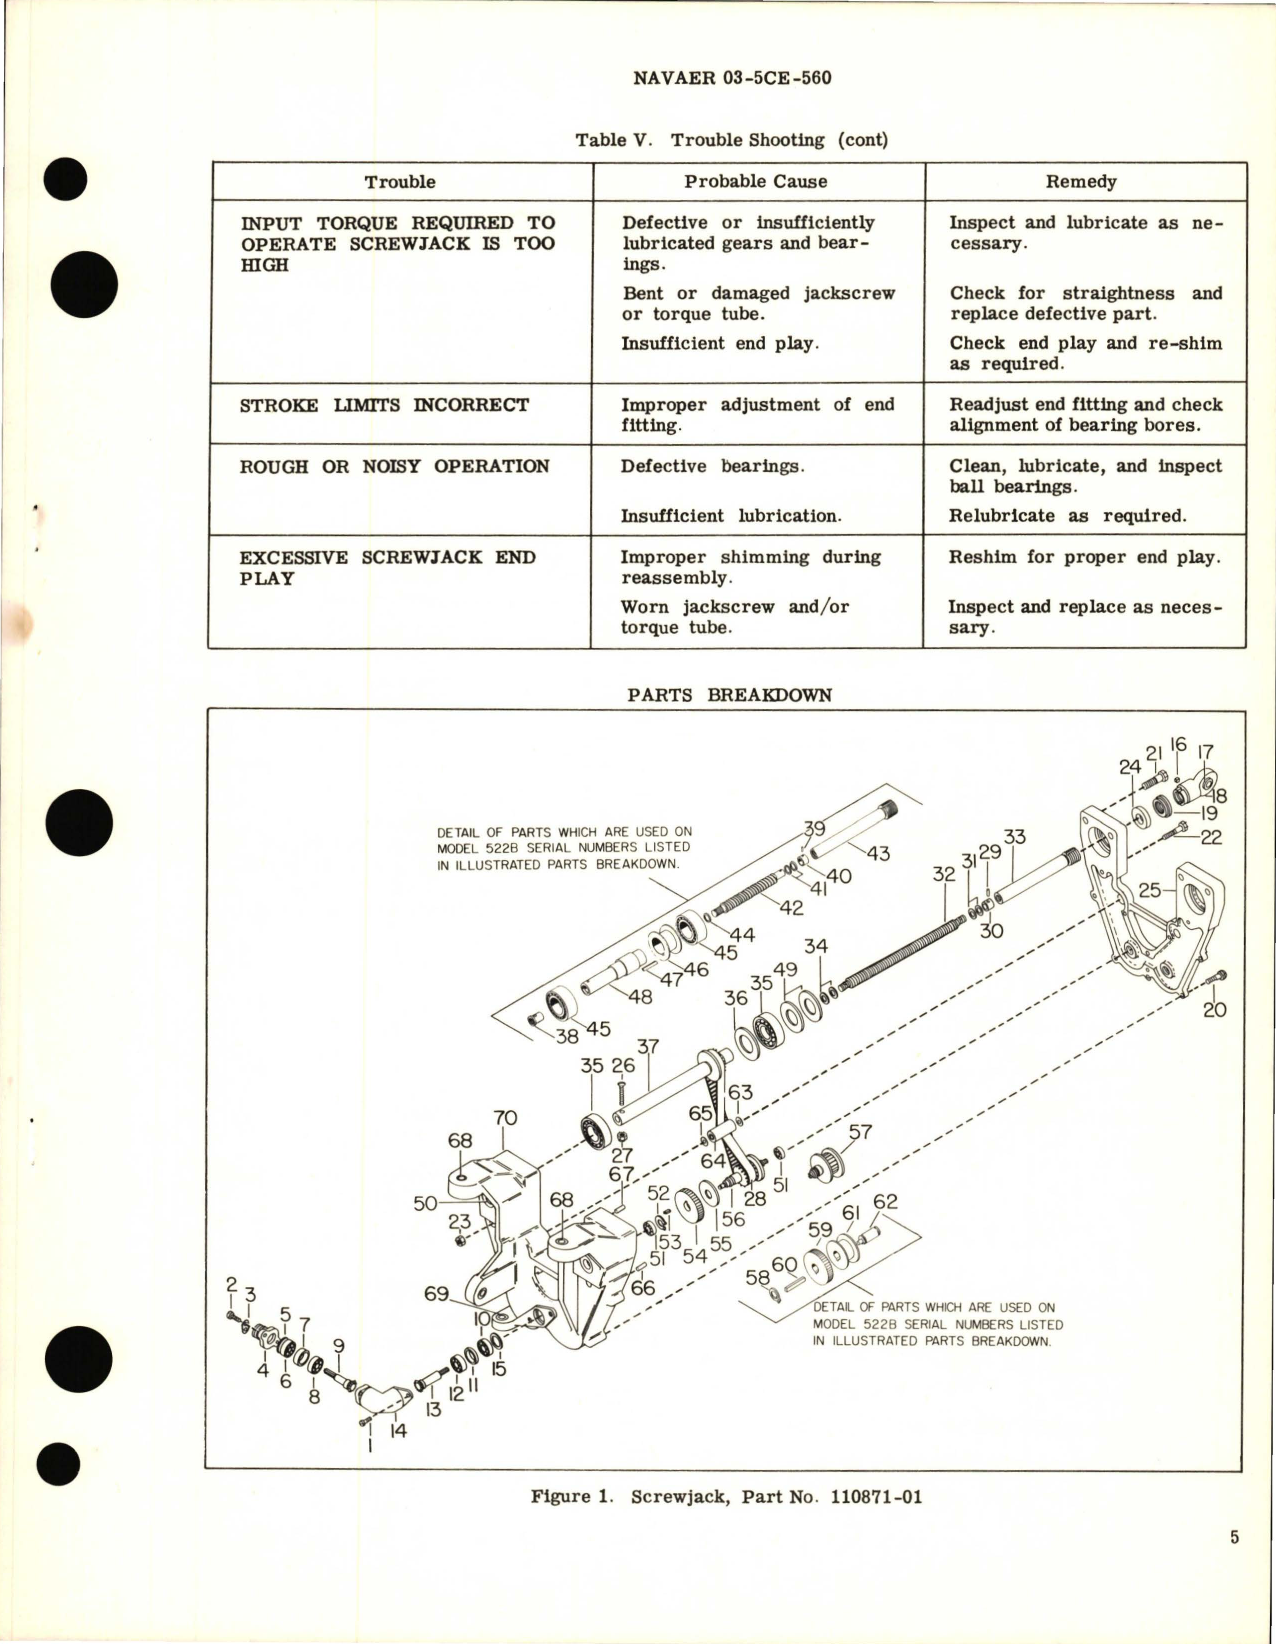 Sample page 5 from AirCorps Library document: Overhaul Instructions with Parts Breakdown for Screwjack - Part 110871-01